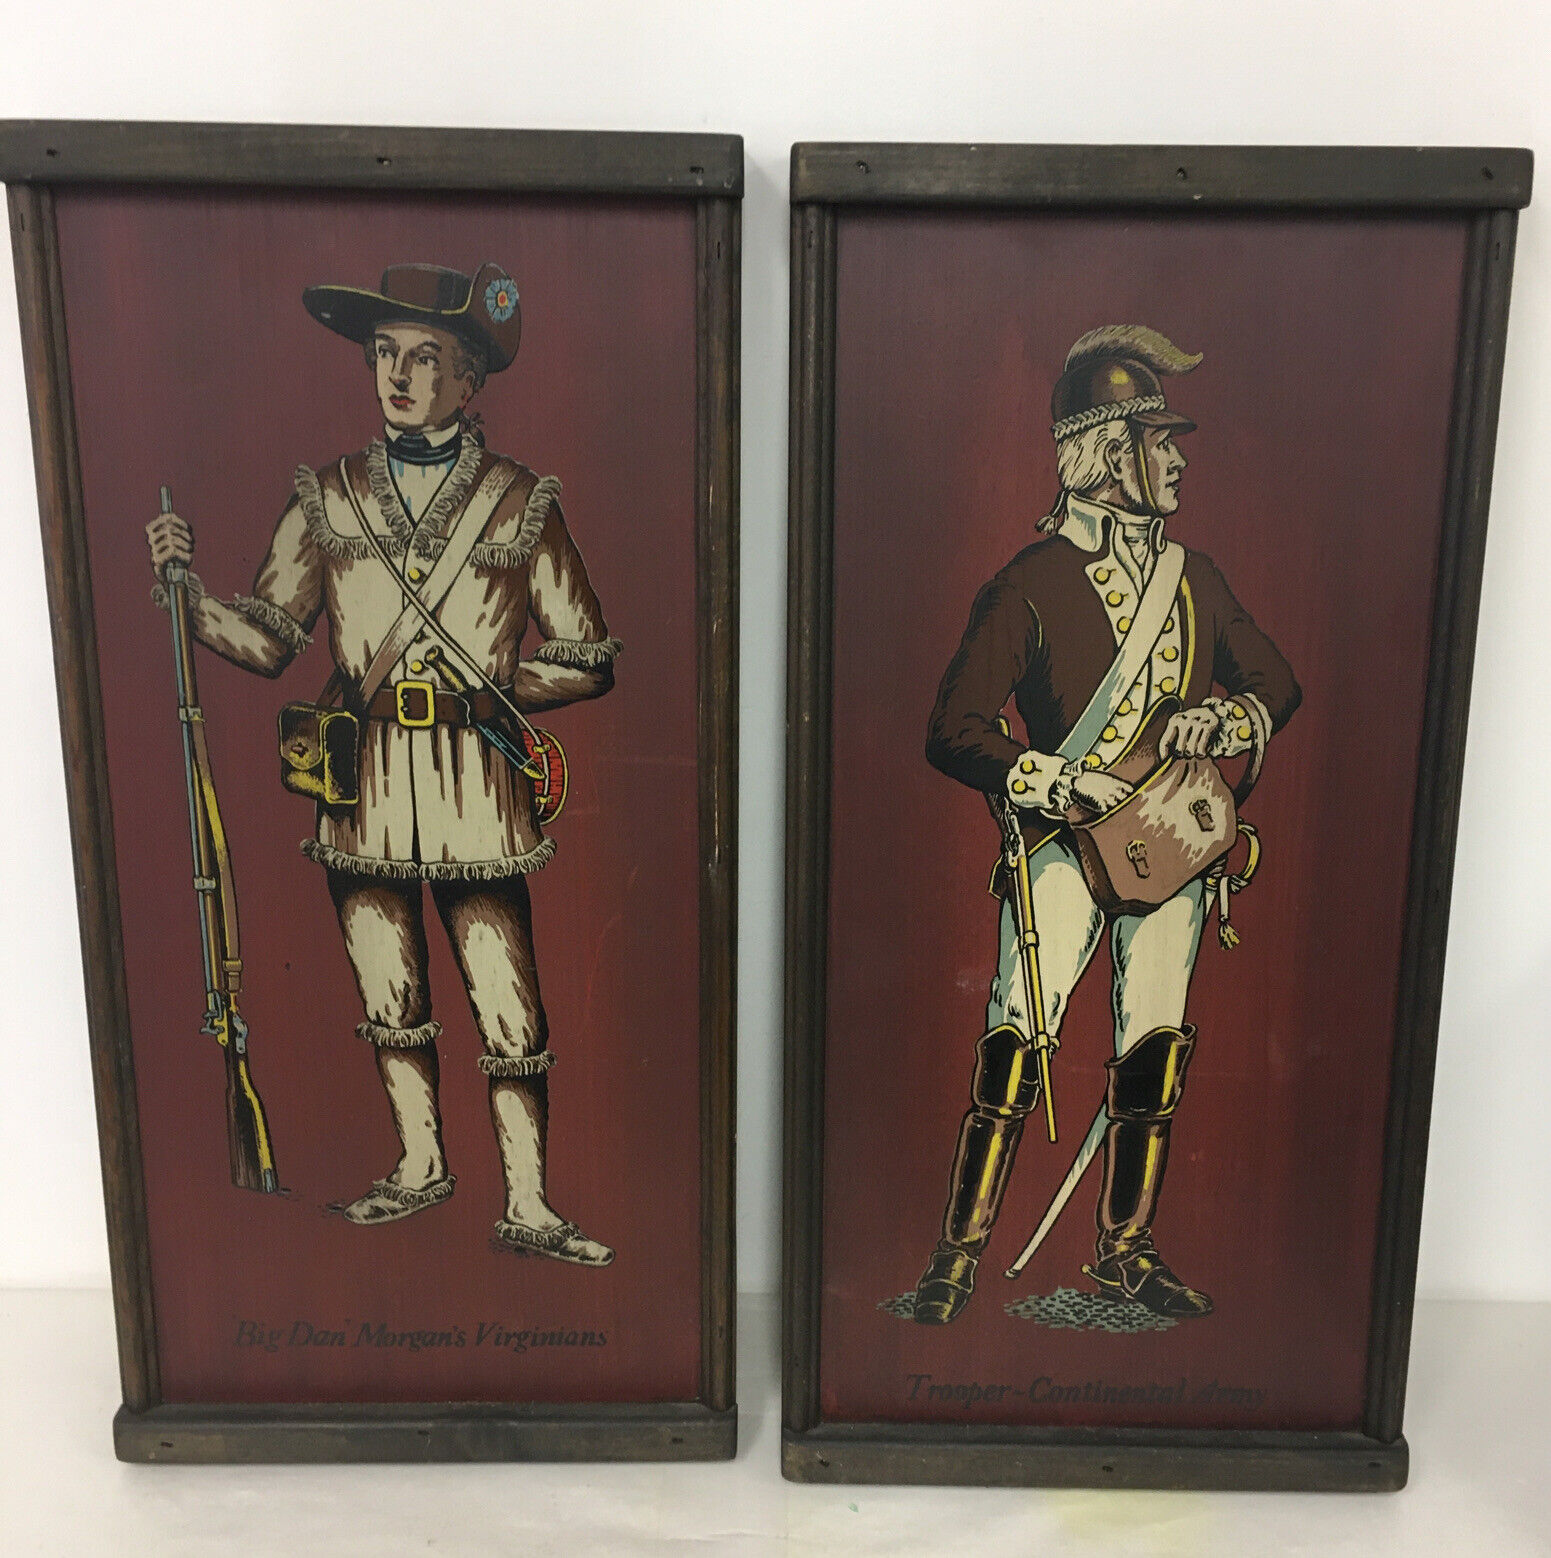 VTG Yorkraft Inc. Wooden Picture of confederate Soldier, Civil War Military